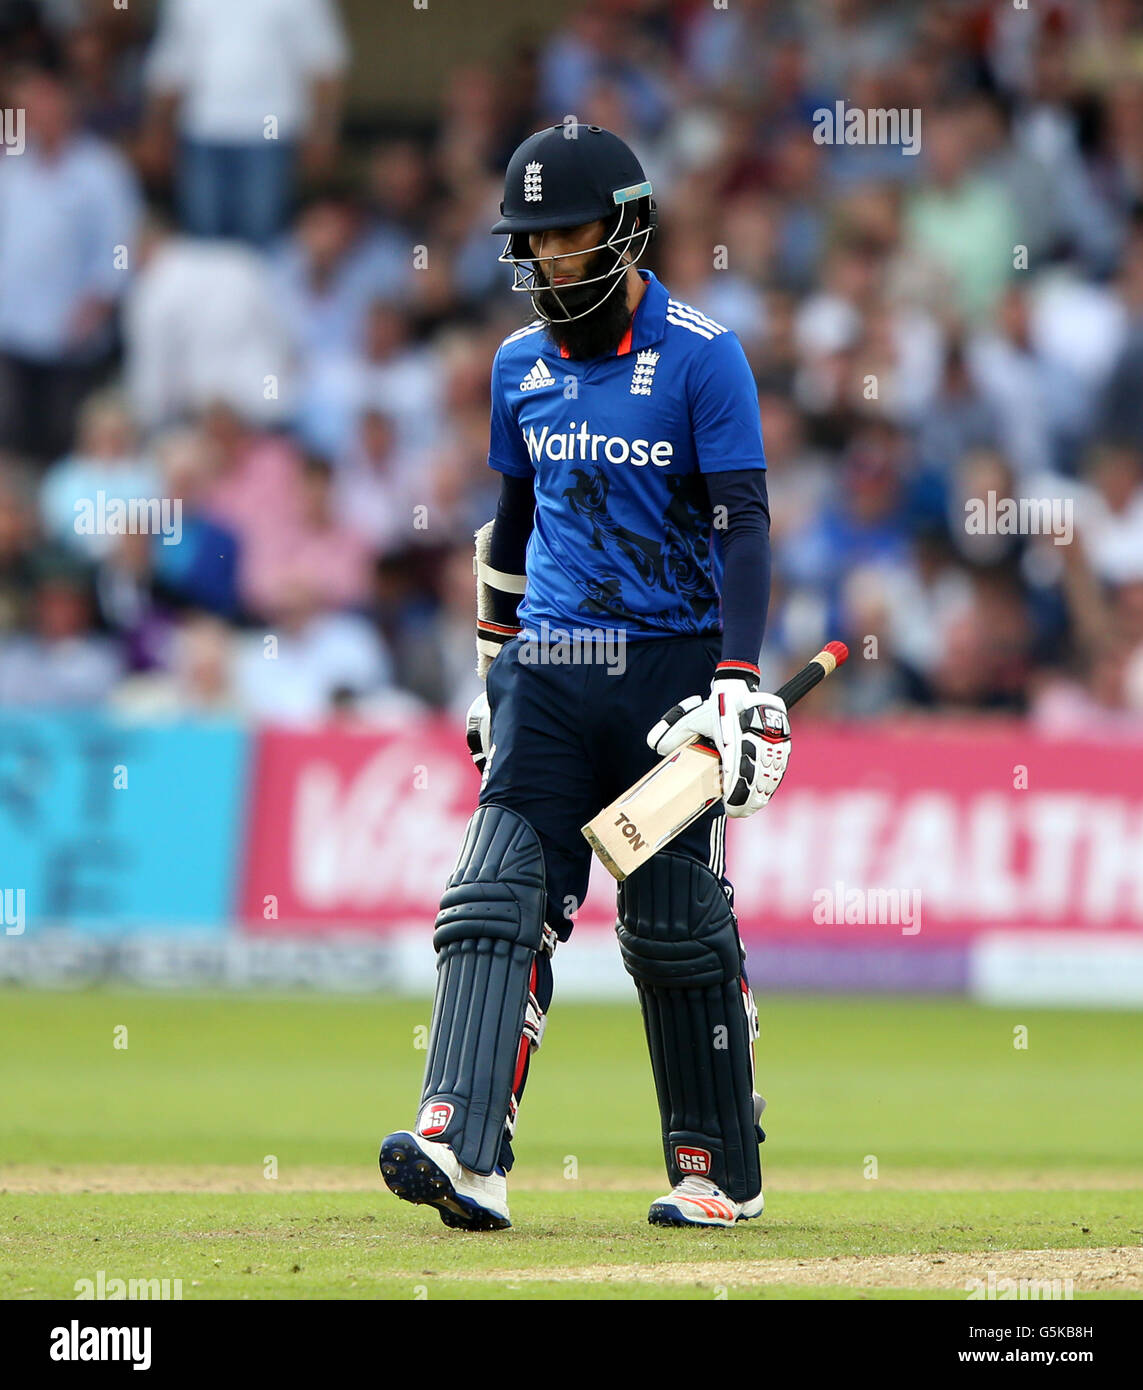 England's Moeen Ali walks off after being dismissed by Sri Lanka's Nuwan Pradeep during the First One Day International at Trent Bridge, Nottingham. Stock Photo